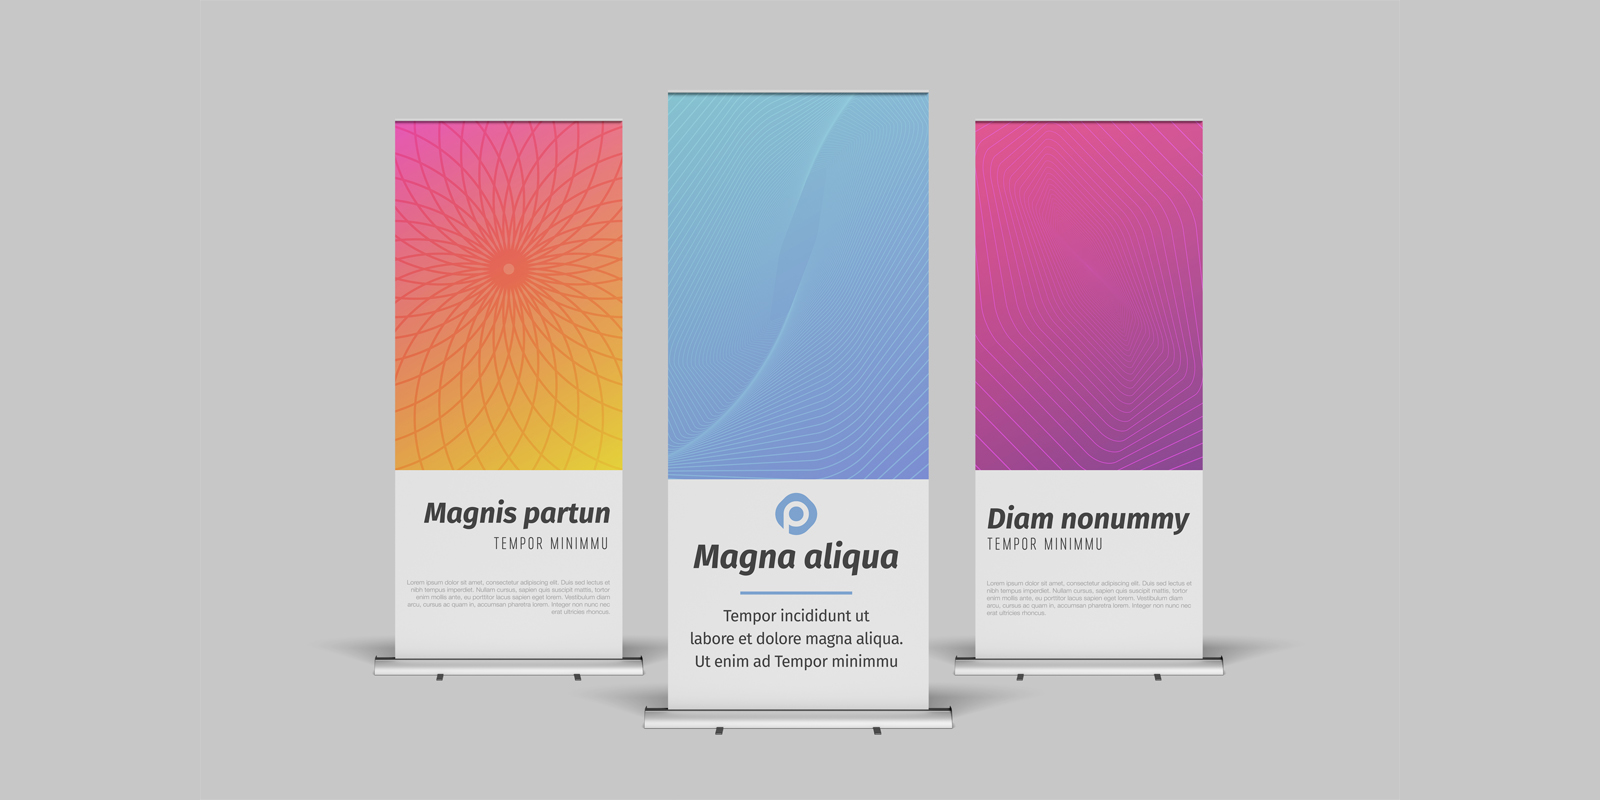 Roller banners in Paris - Print with Pagerr